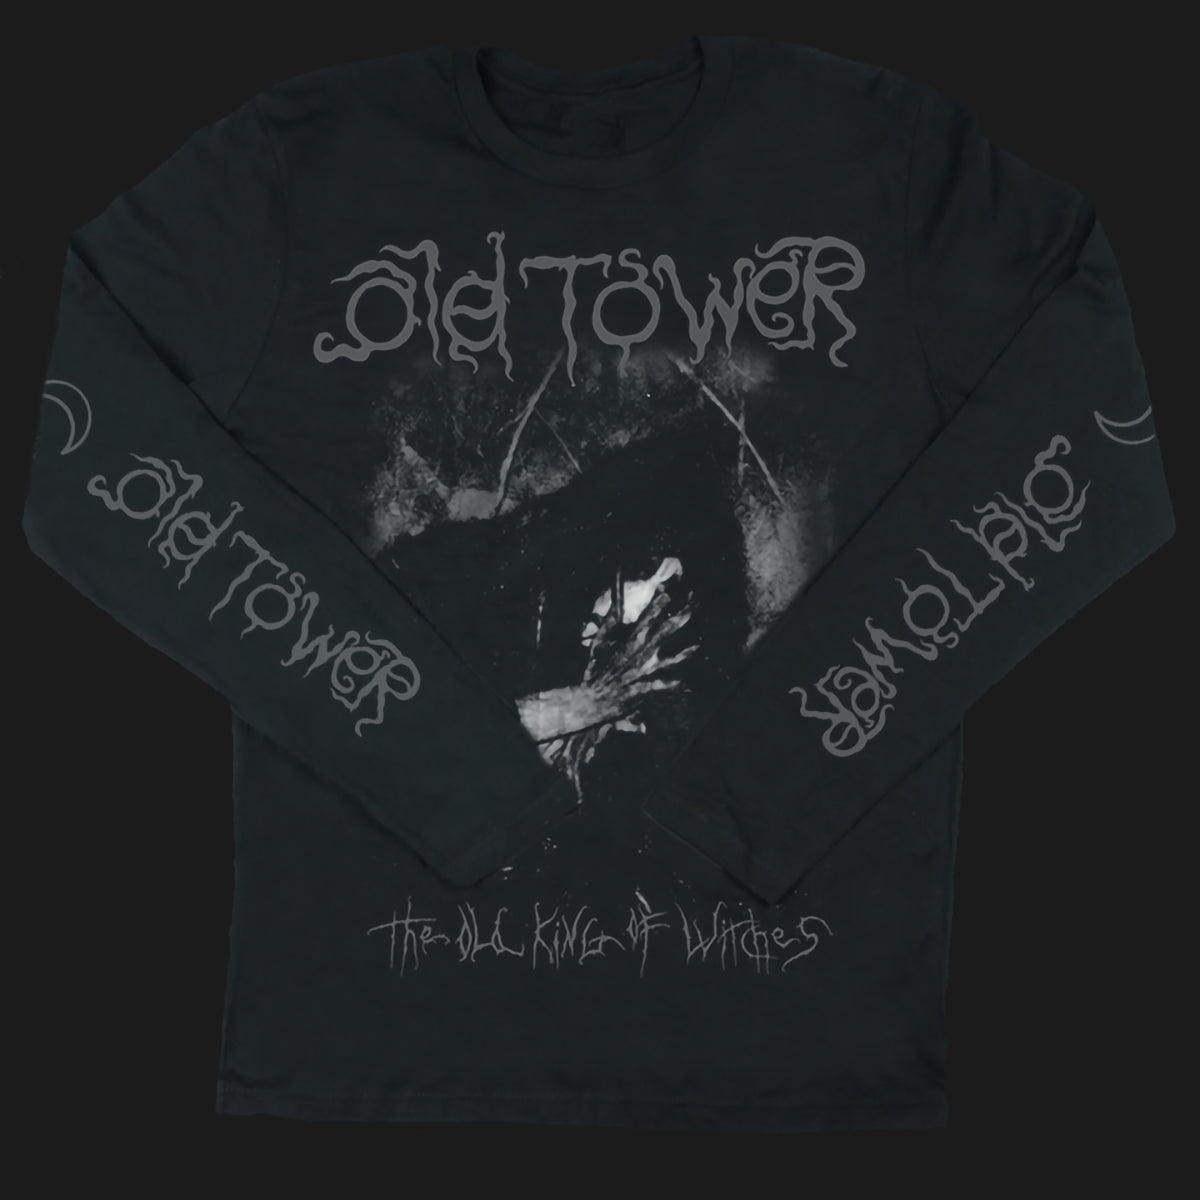 OId Tower | The Old King of Witches | Long Sleeve